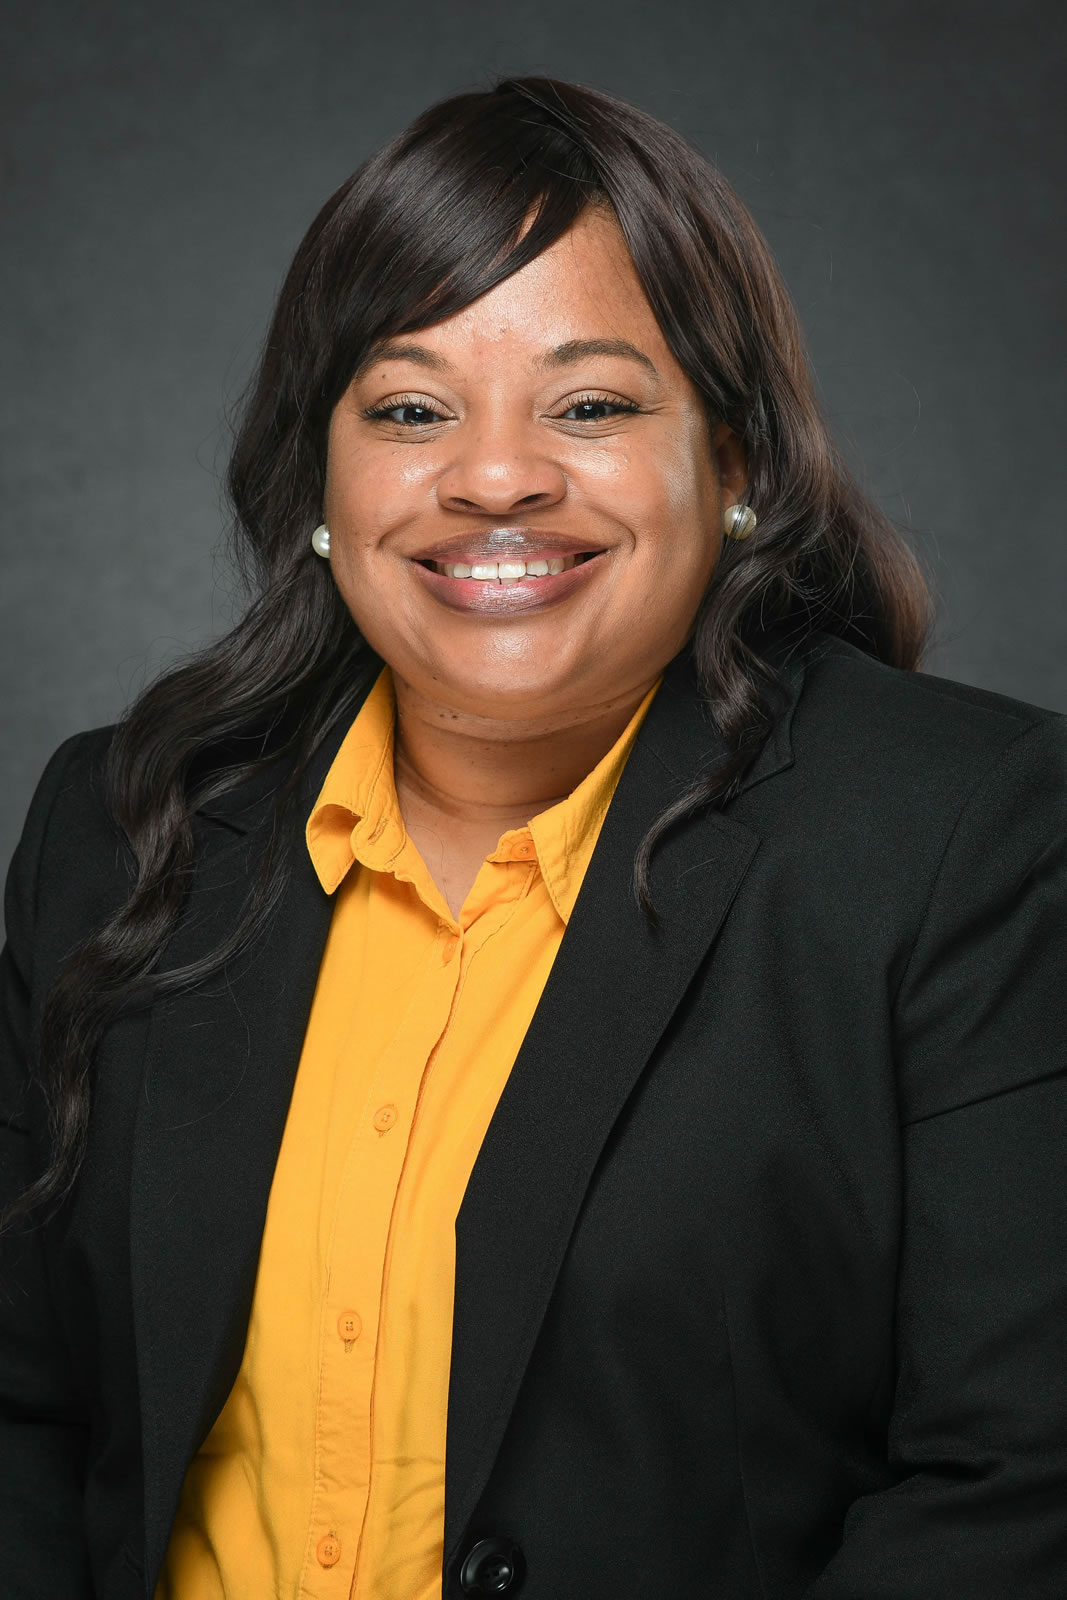 Precious Wilkerson-Carr, LCSW-Title IV-E Child Welfare Coordinator and Lecturer